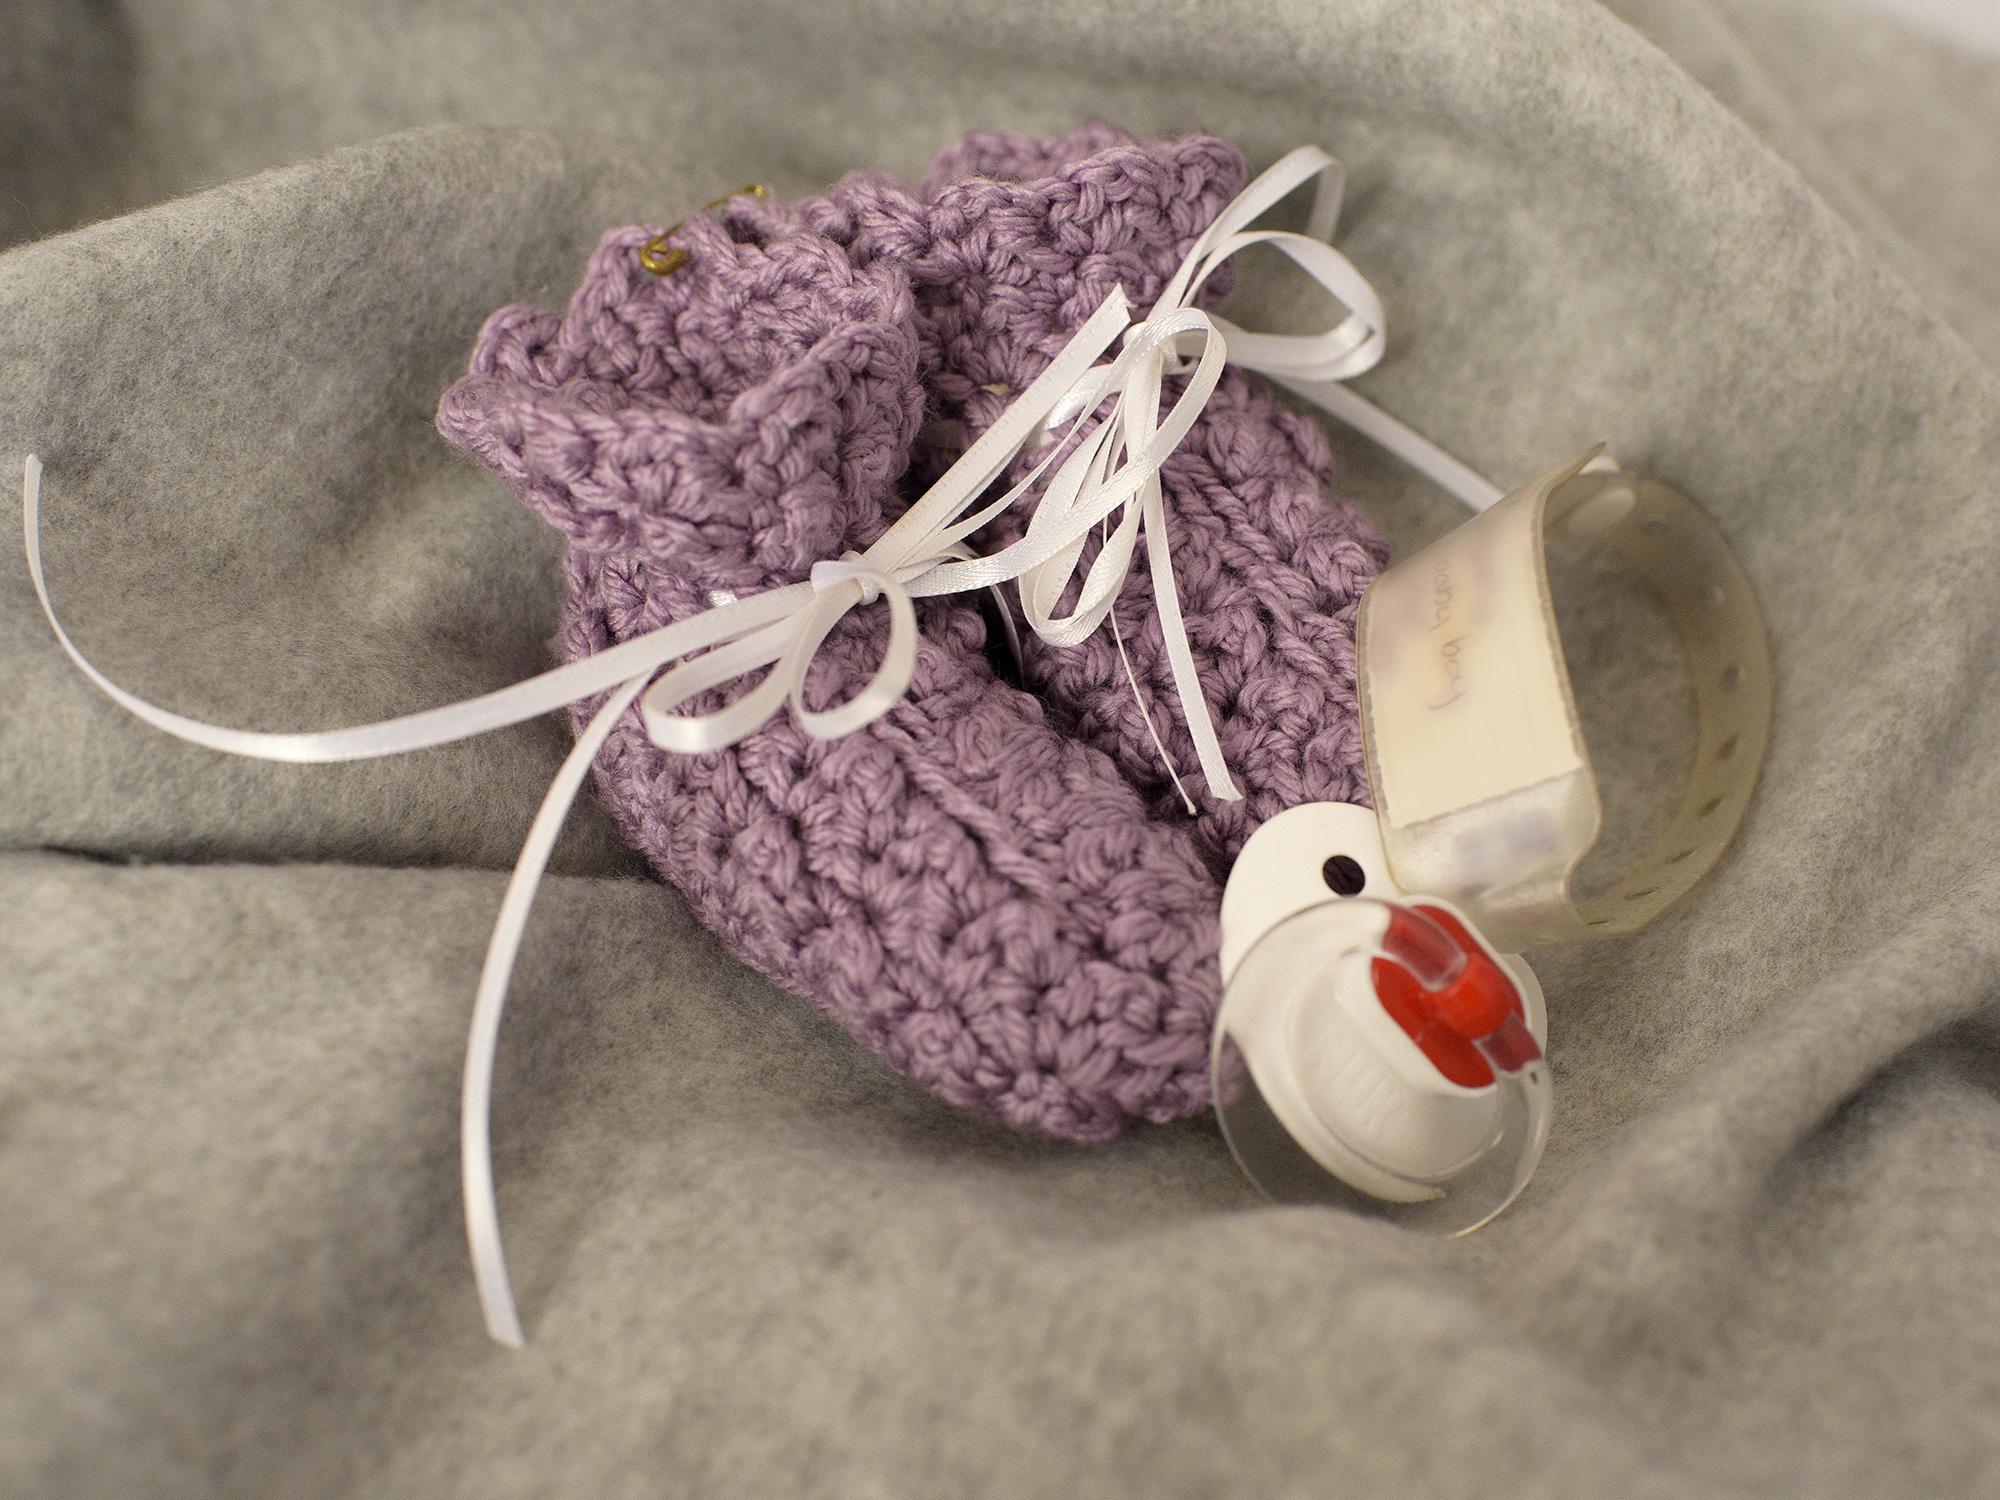 Still life arrangement of a pair of knitted infants booties, a hospital ID band and a pacifier.